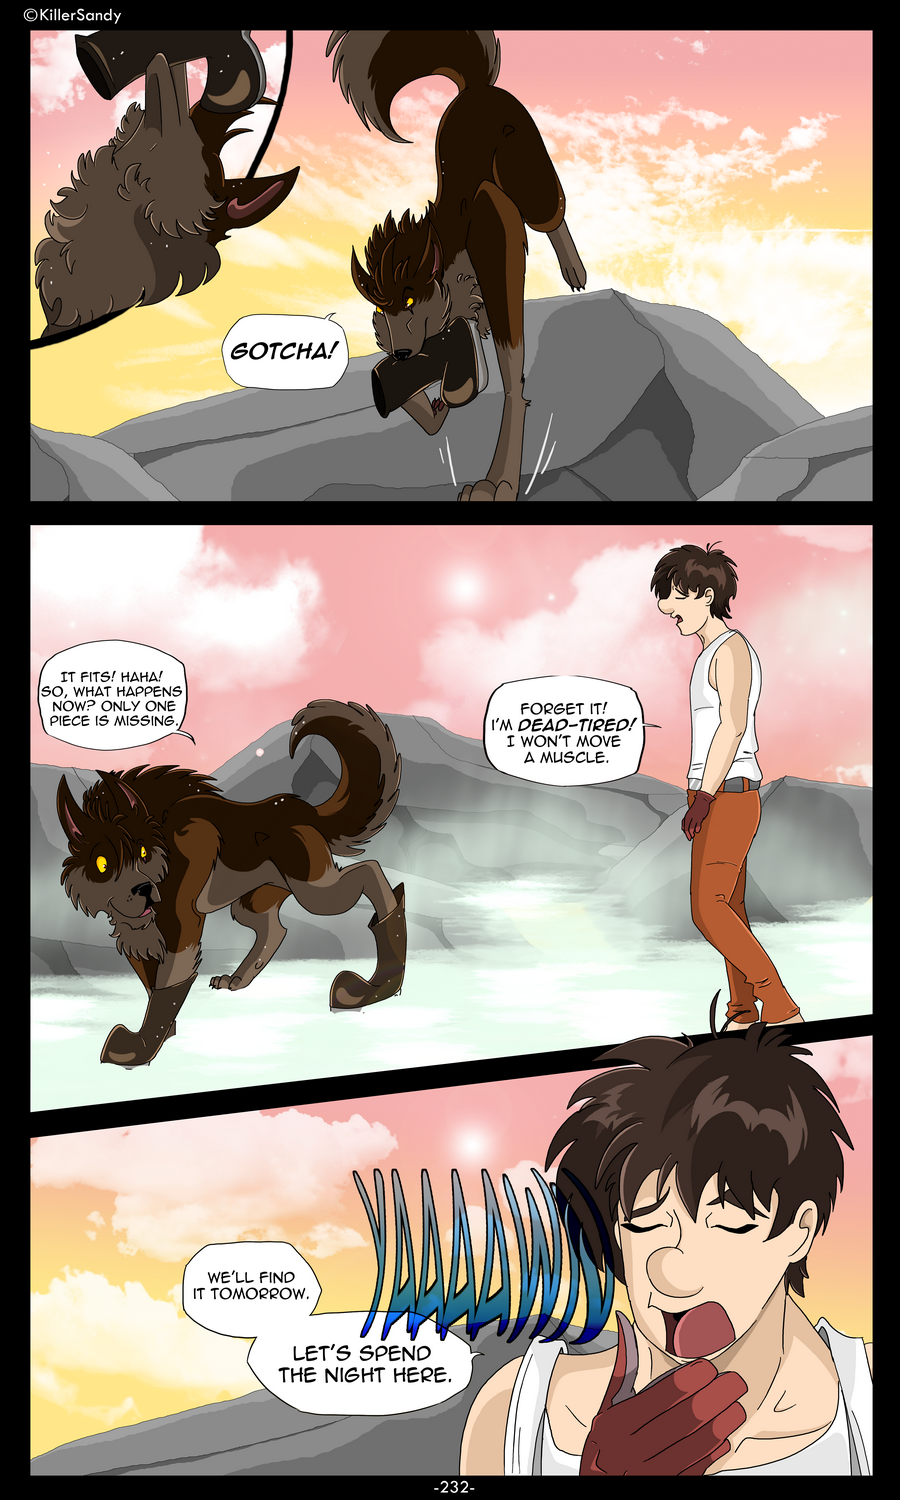 The Prince of the Moonlight Stone page 232